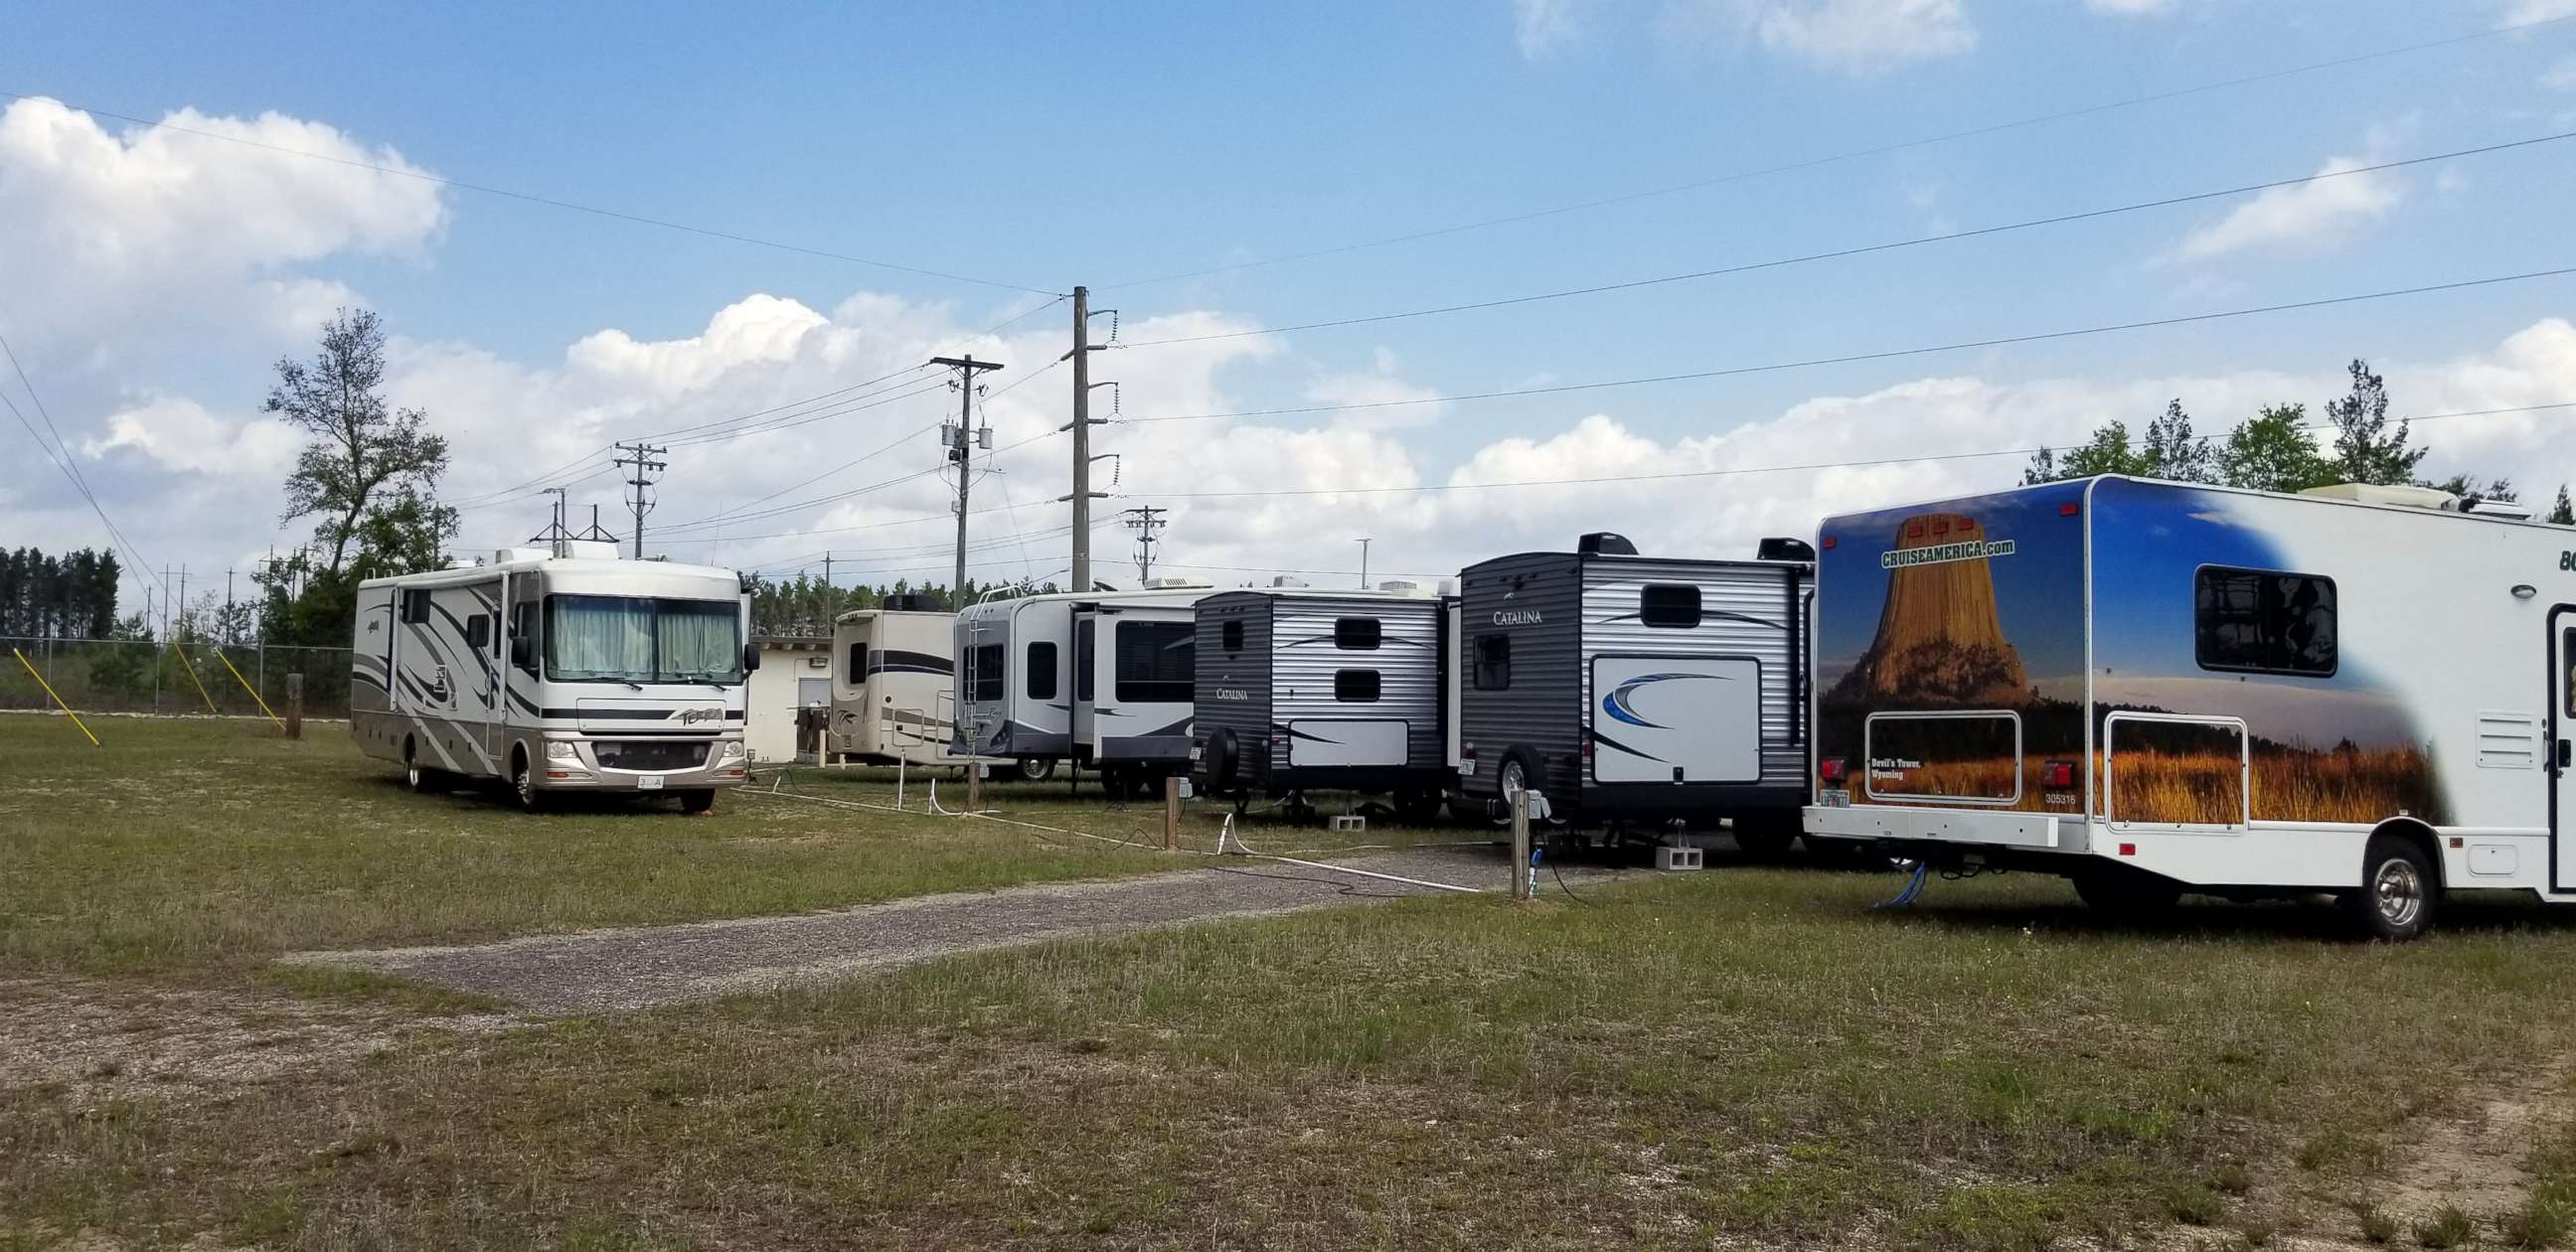 PHOTO: An undated photo shared by the City of Tallahassee in Florida shows RVs set up to house utility workers during the COVID19 pandemic.